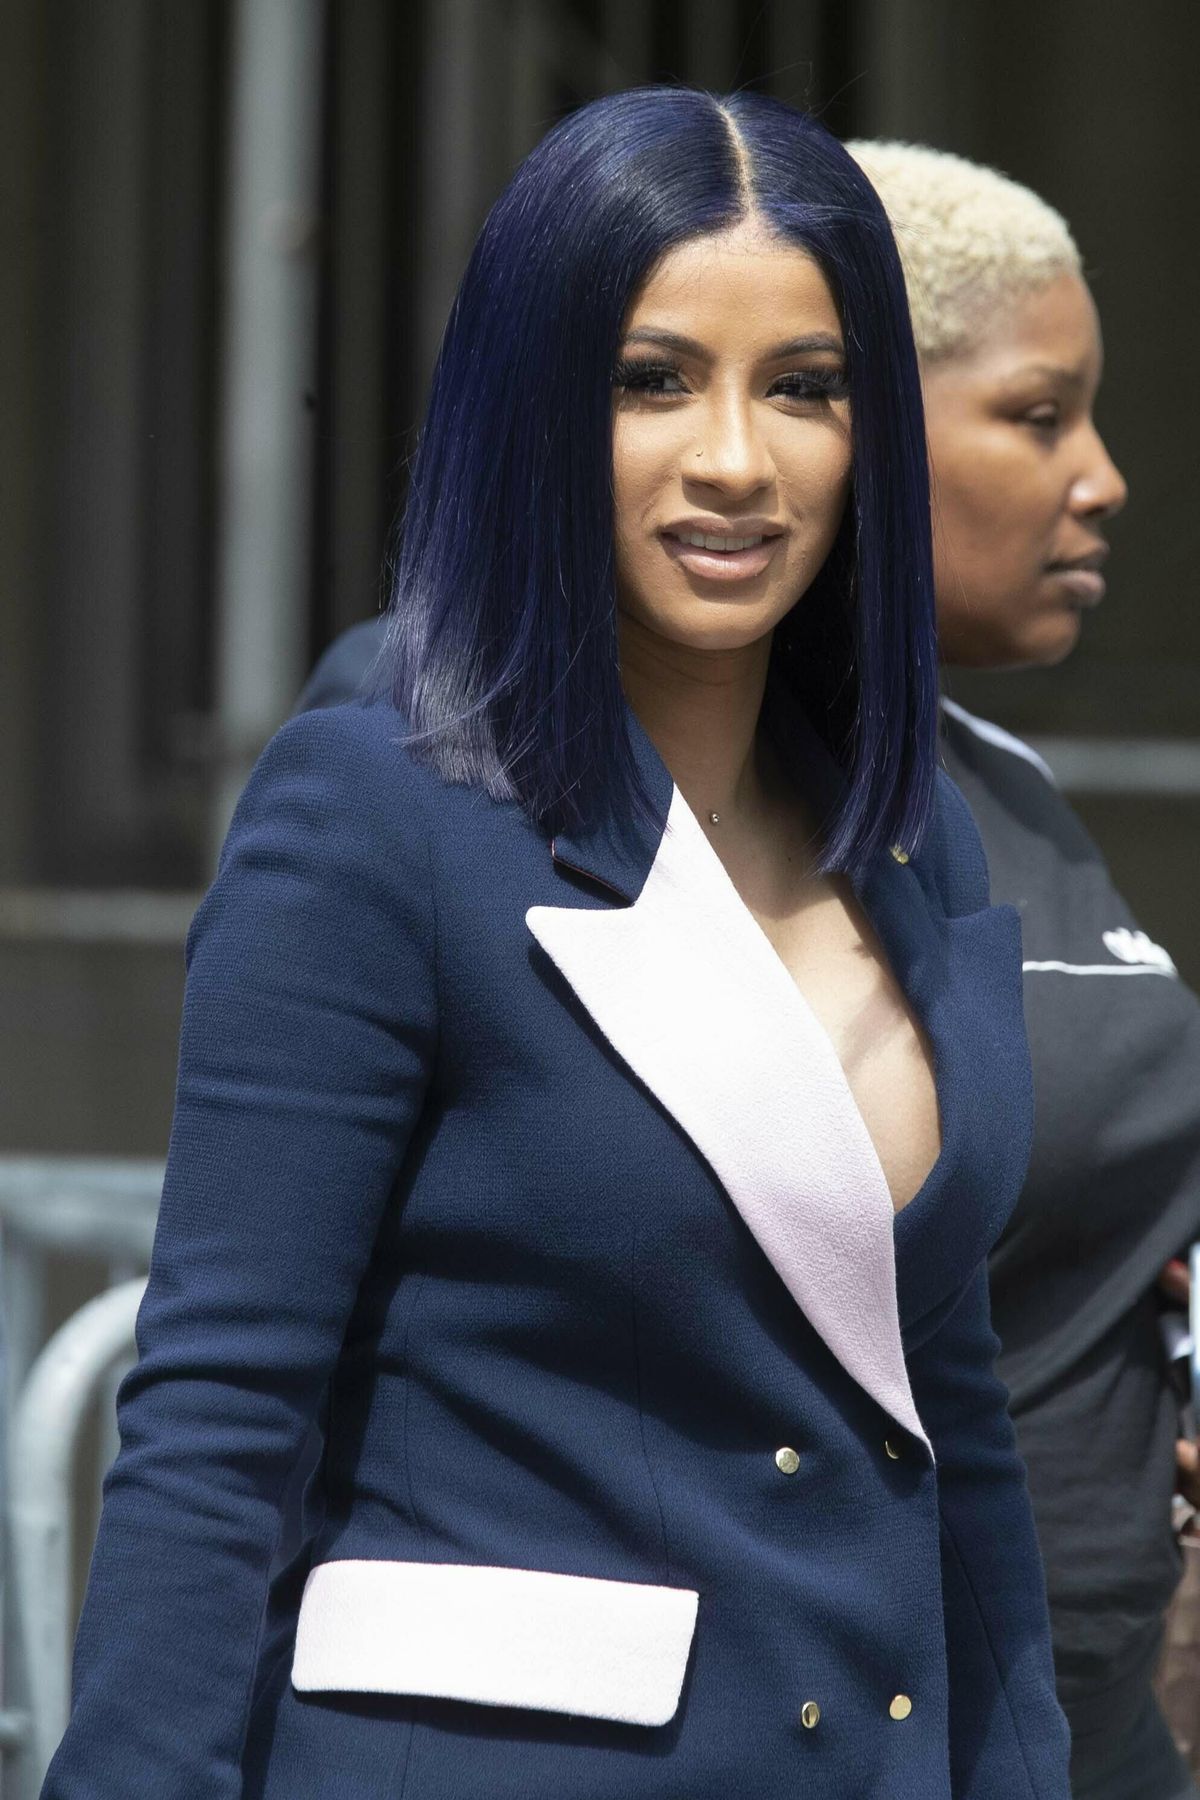 Rapper Cardi B leaves Queens County Criminal Court, Tuesday, June 25, 2019, in New York. (Mary Altaffer / Associated Press)